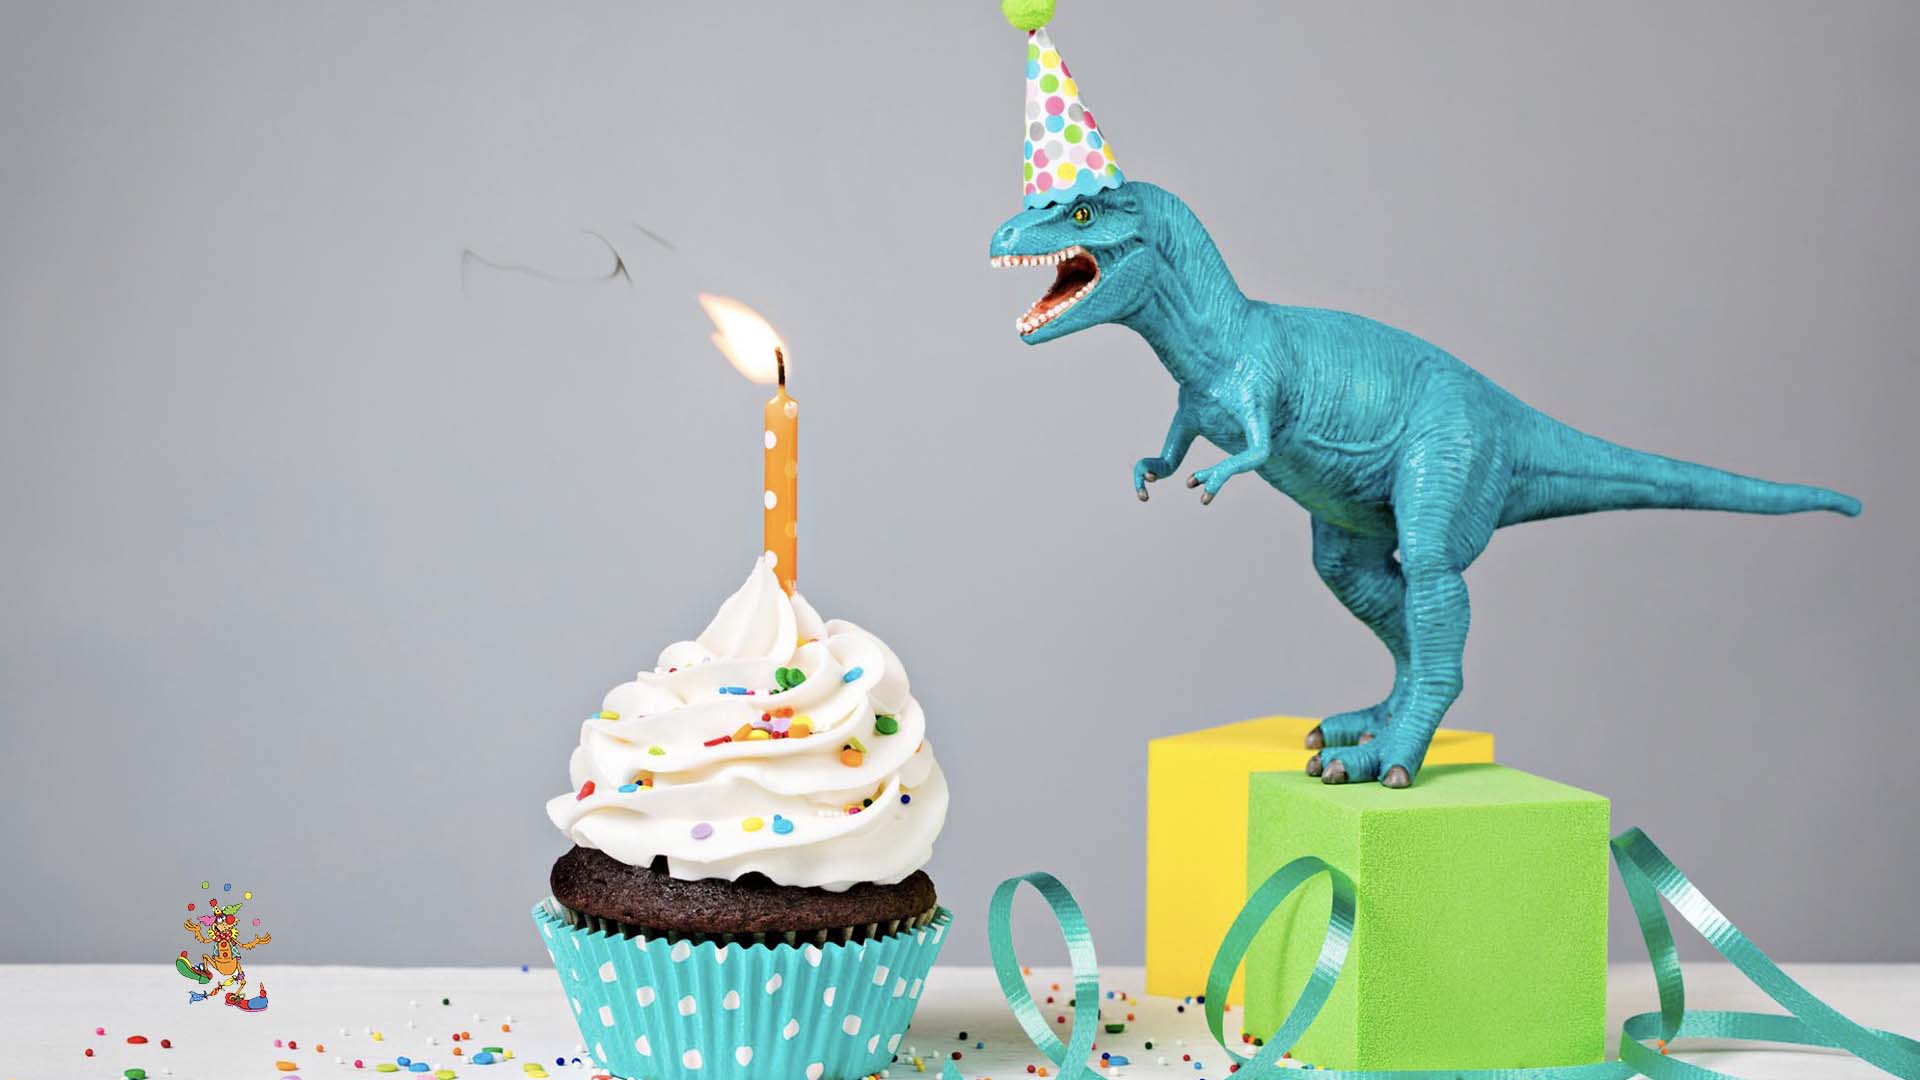 A flea celebrating its birthday with a cake and dinosaur